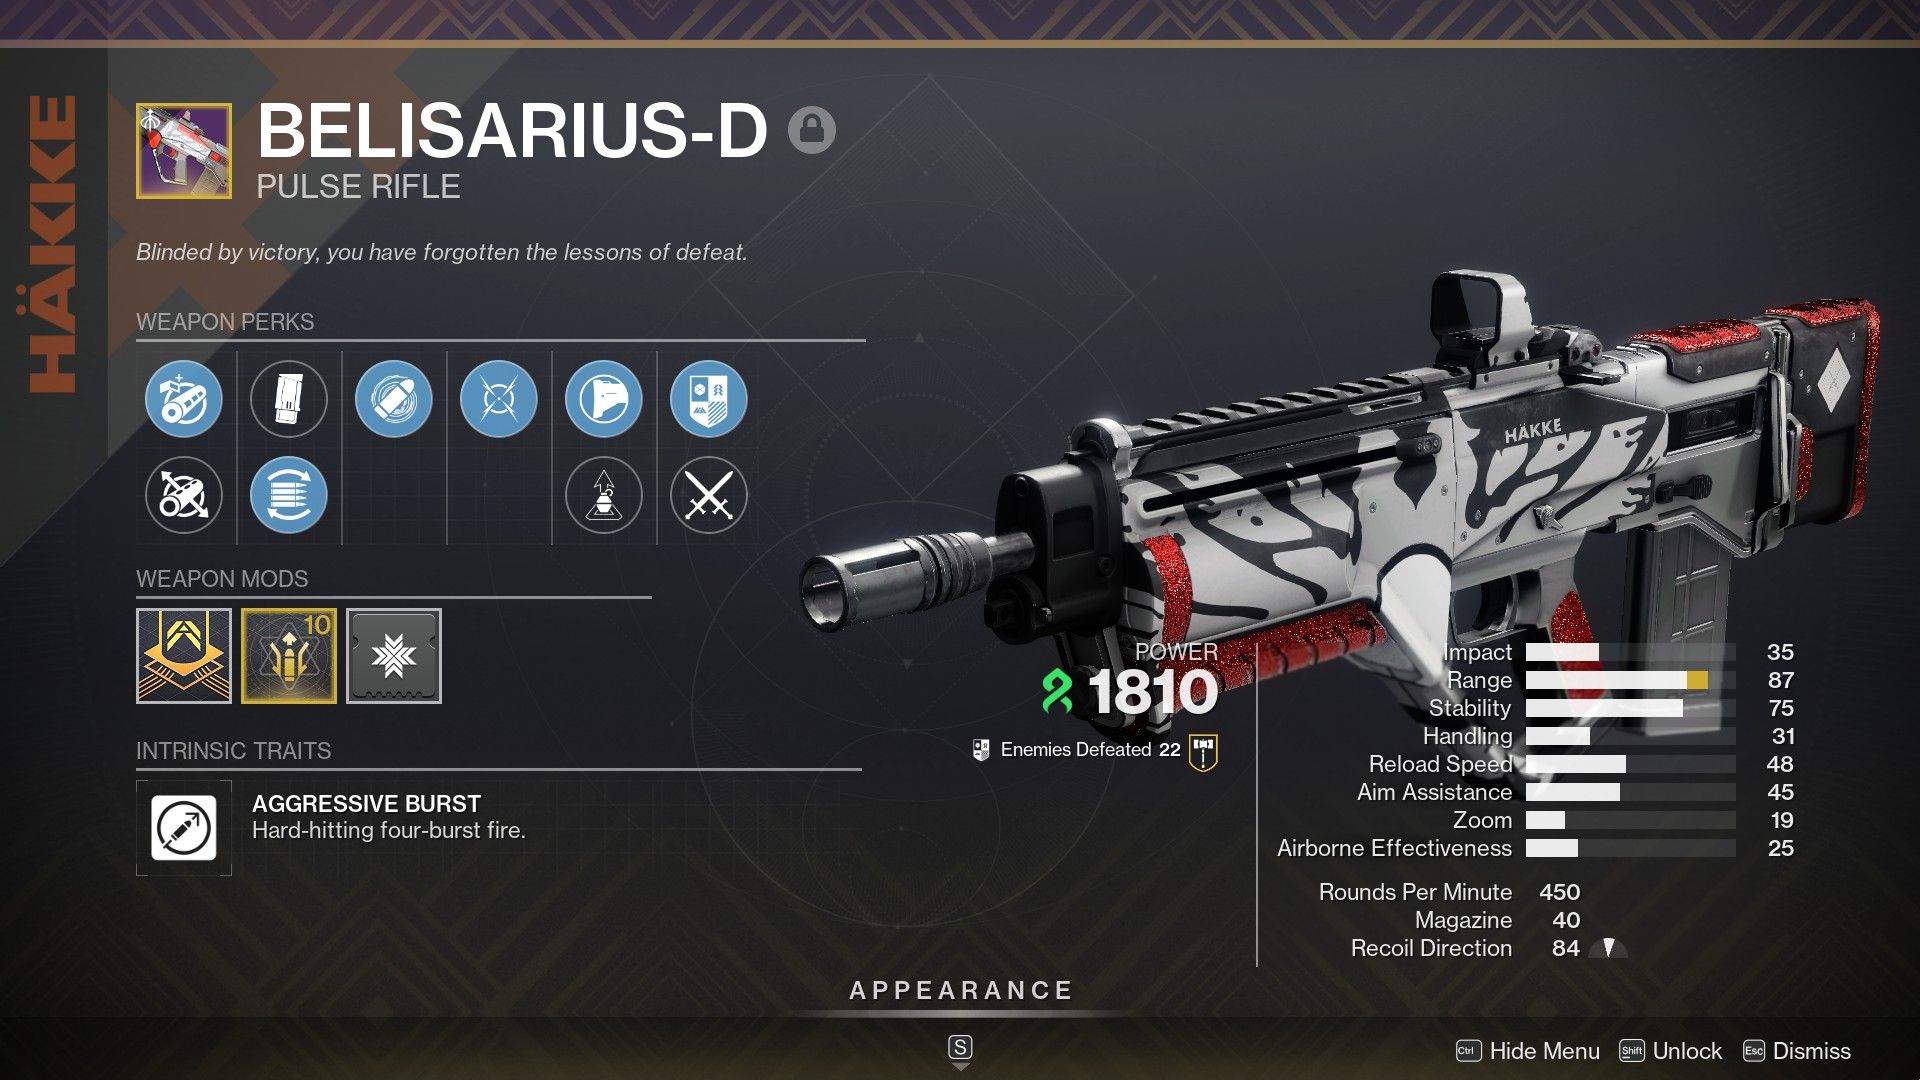 A PvP god roll for the Belisarius-D in Destiny 2